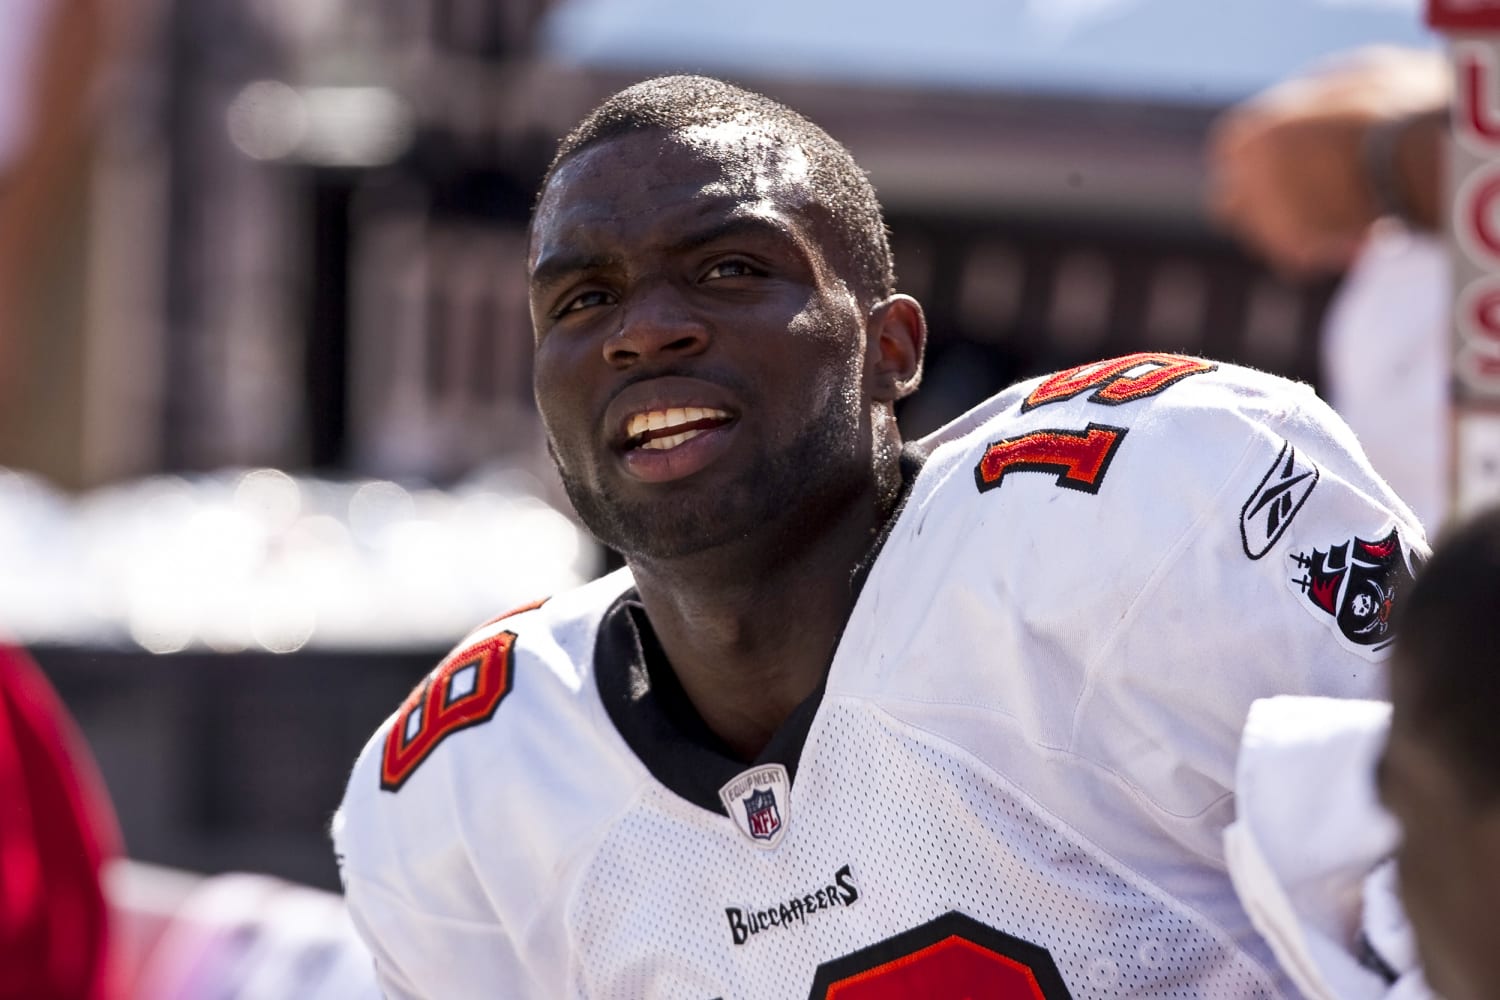 Former NFL wide receiver Mike Williams has died at the age of 36 after a construction site accident.